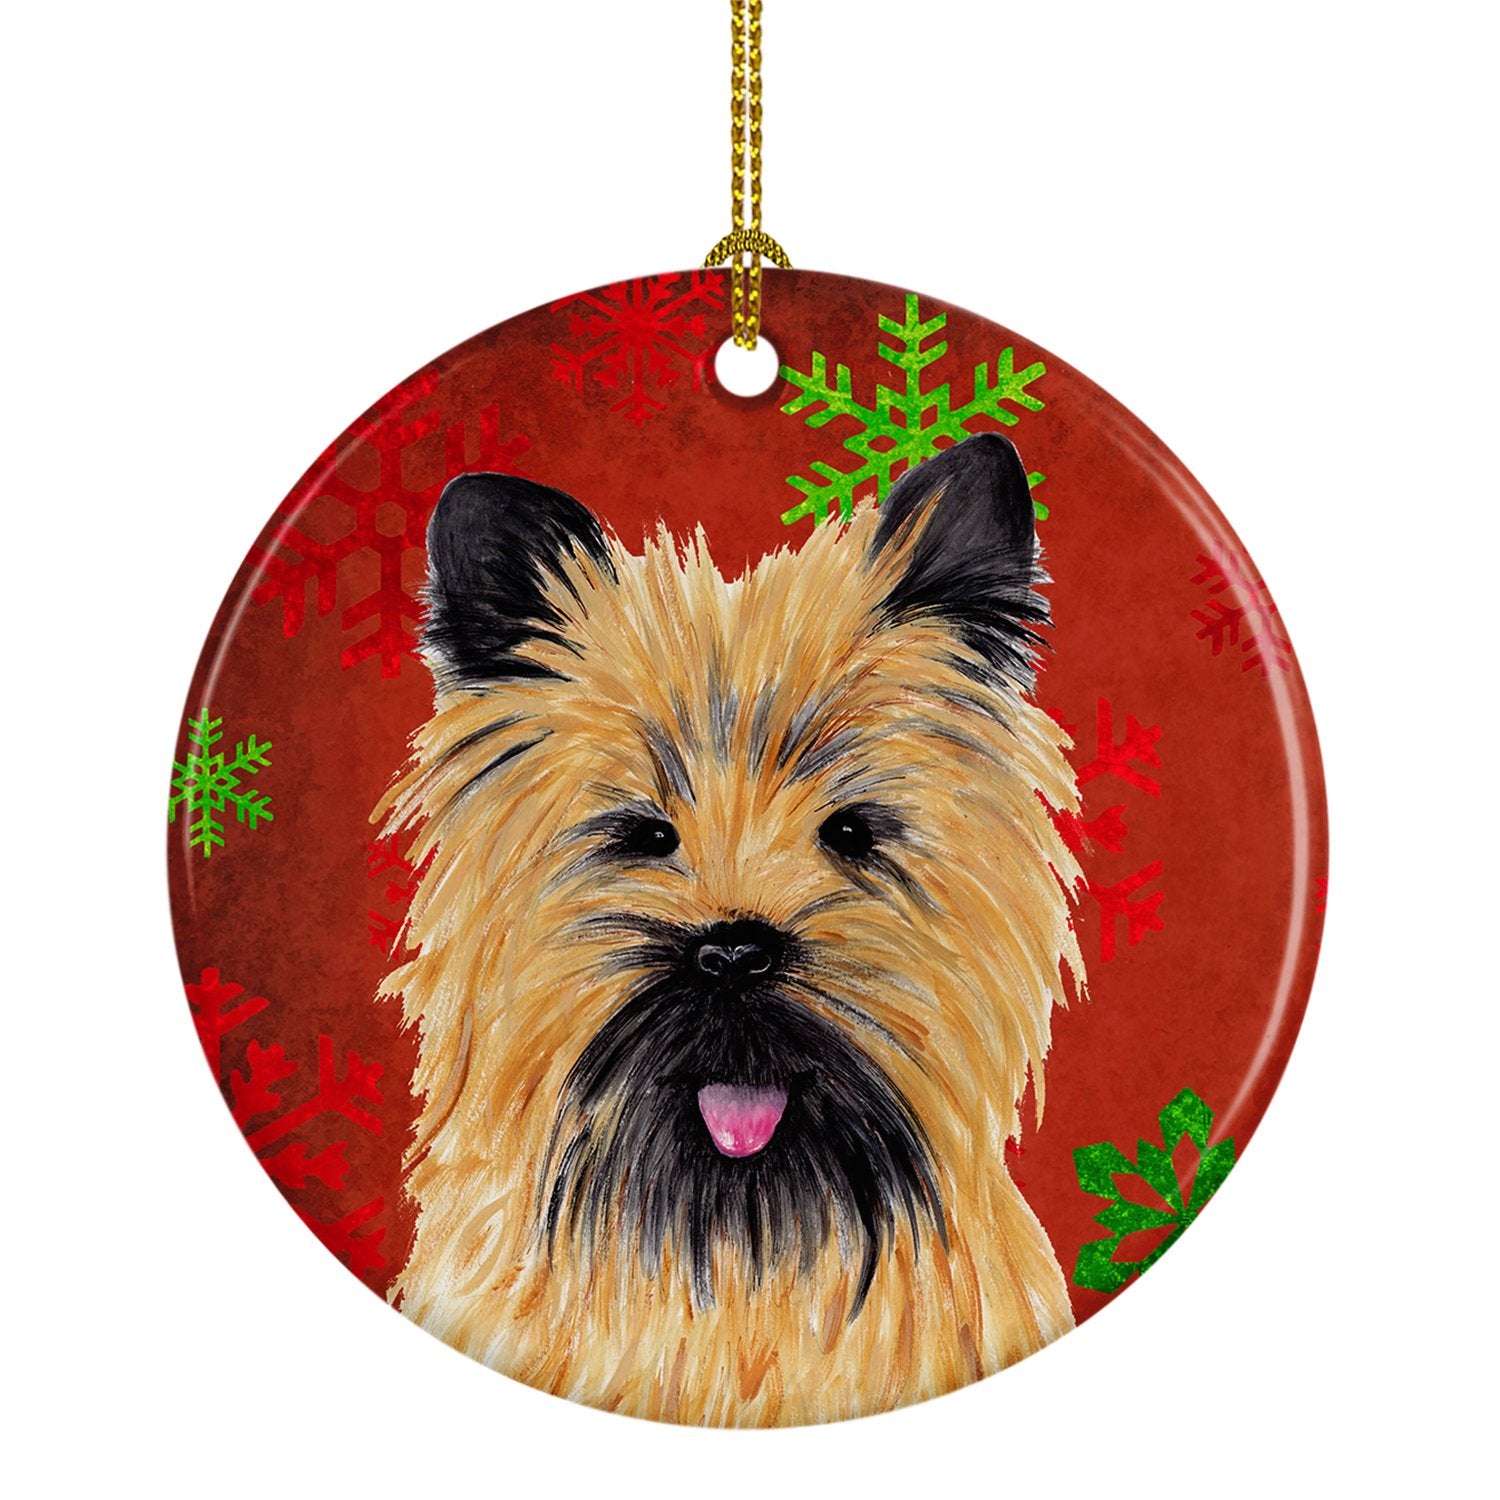 Cairn Terrier Red Snowflakes Holiday Christmas Ceramic Ornament SC9415 by Caroline's Treasures